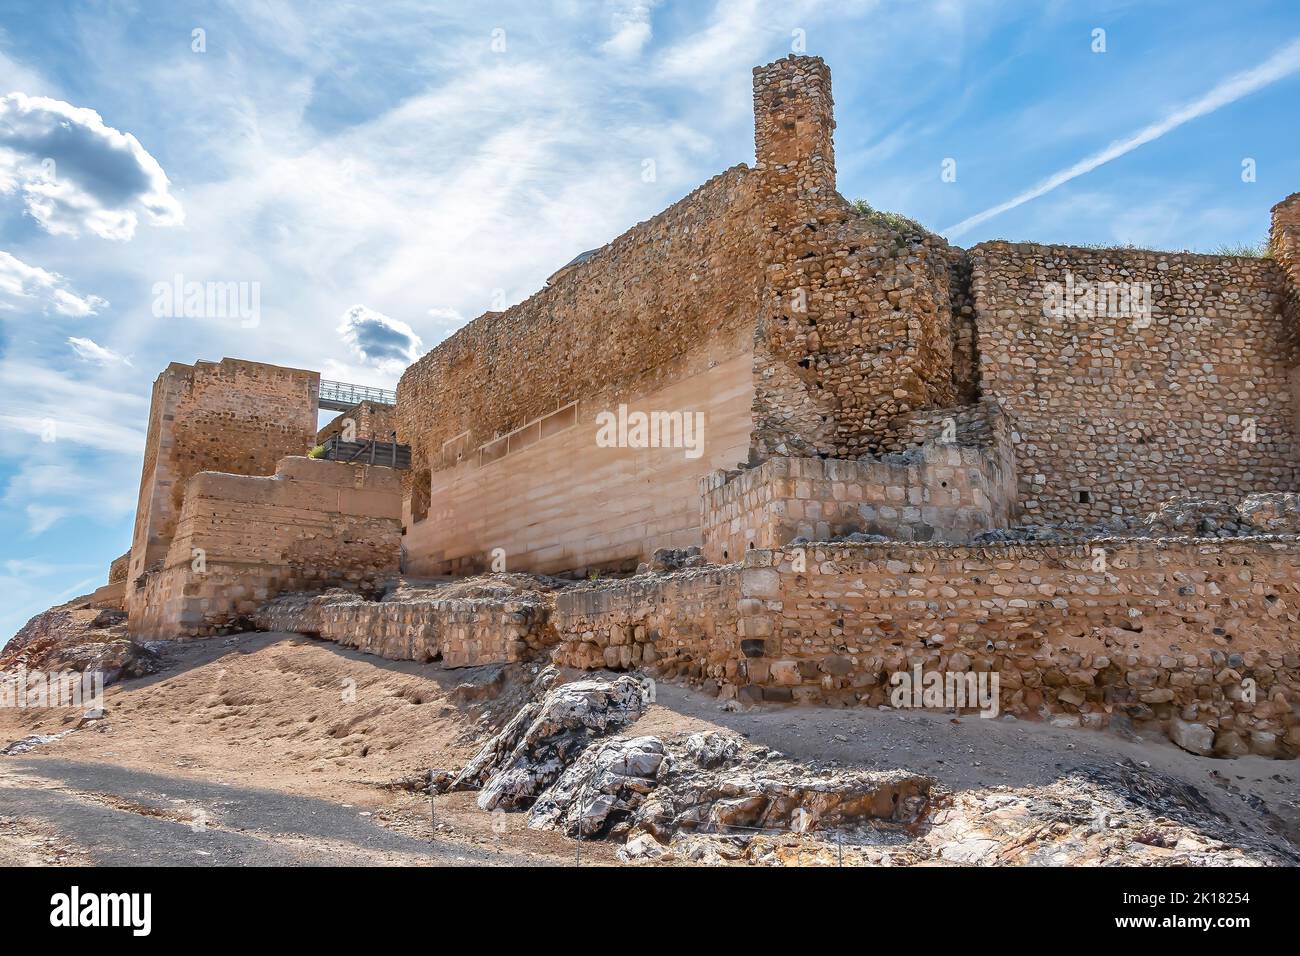 Archaeological Park of Calatrava la Vieja, it is Arab in origin.The building incorporates a major water defence system, in combination with various wa Stock Photo